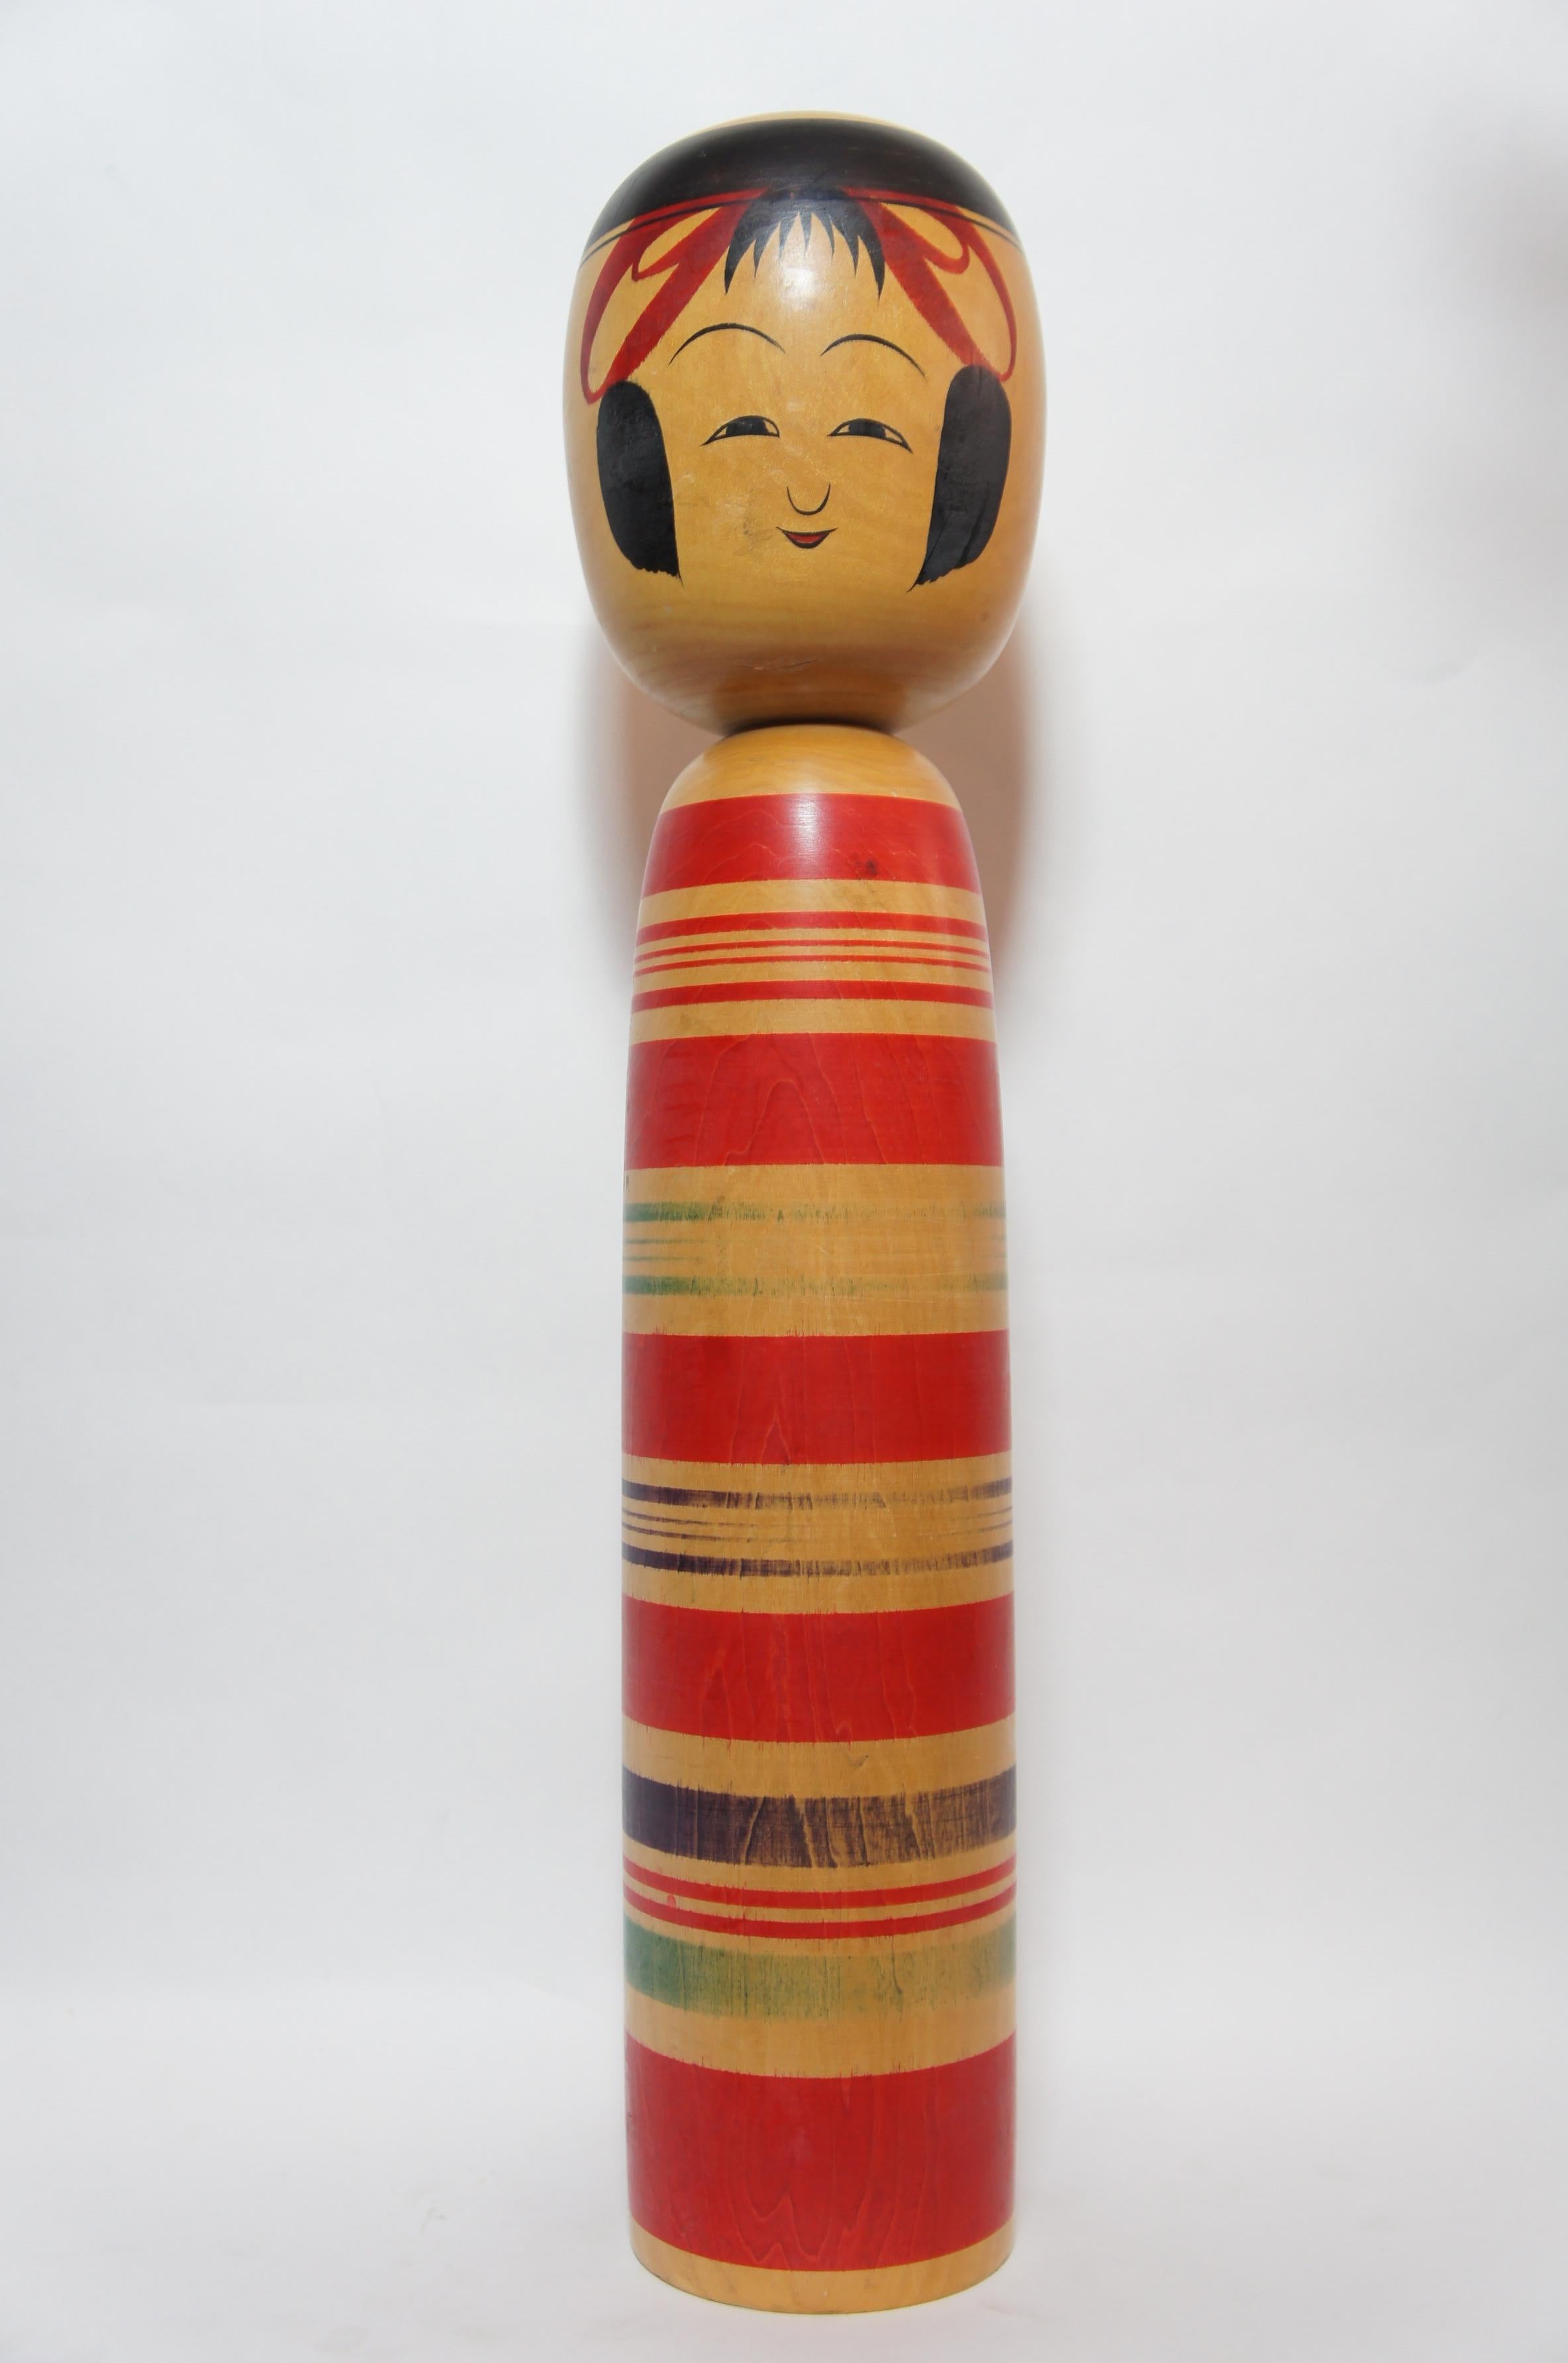 Japanese traditional kokeshi doll signde by Tokunaga Shinichi(1933-).
He is on of the kokeshi artists from Tsuchiyu-onsen, Fukushima, Japan.

The style of this Kokeshi called Tsuchiyu style is on of 11 types of Kokeshi and is one of three most